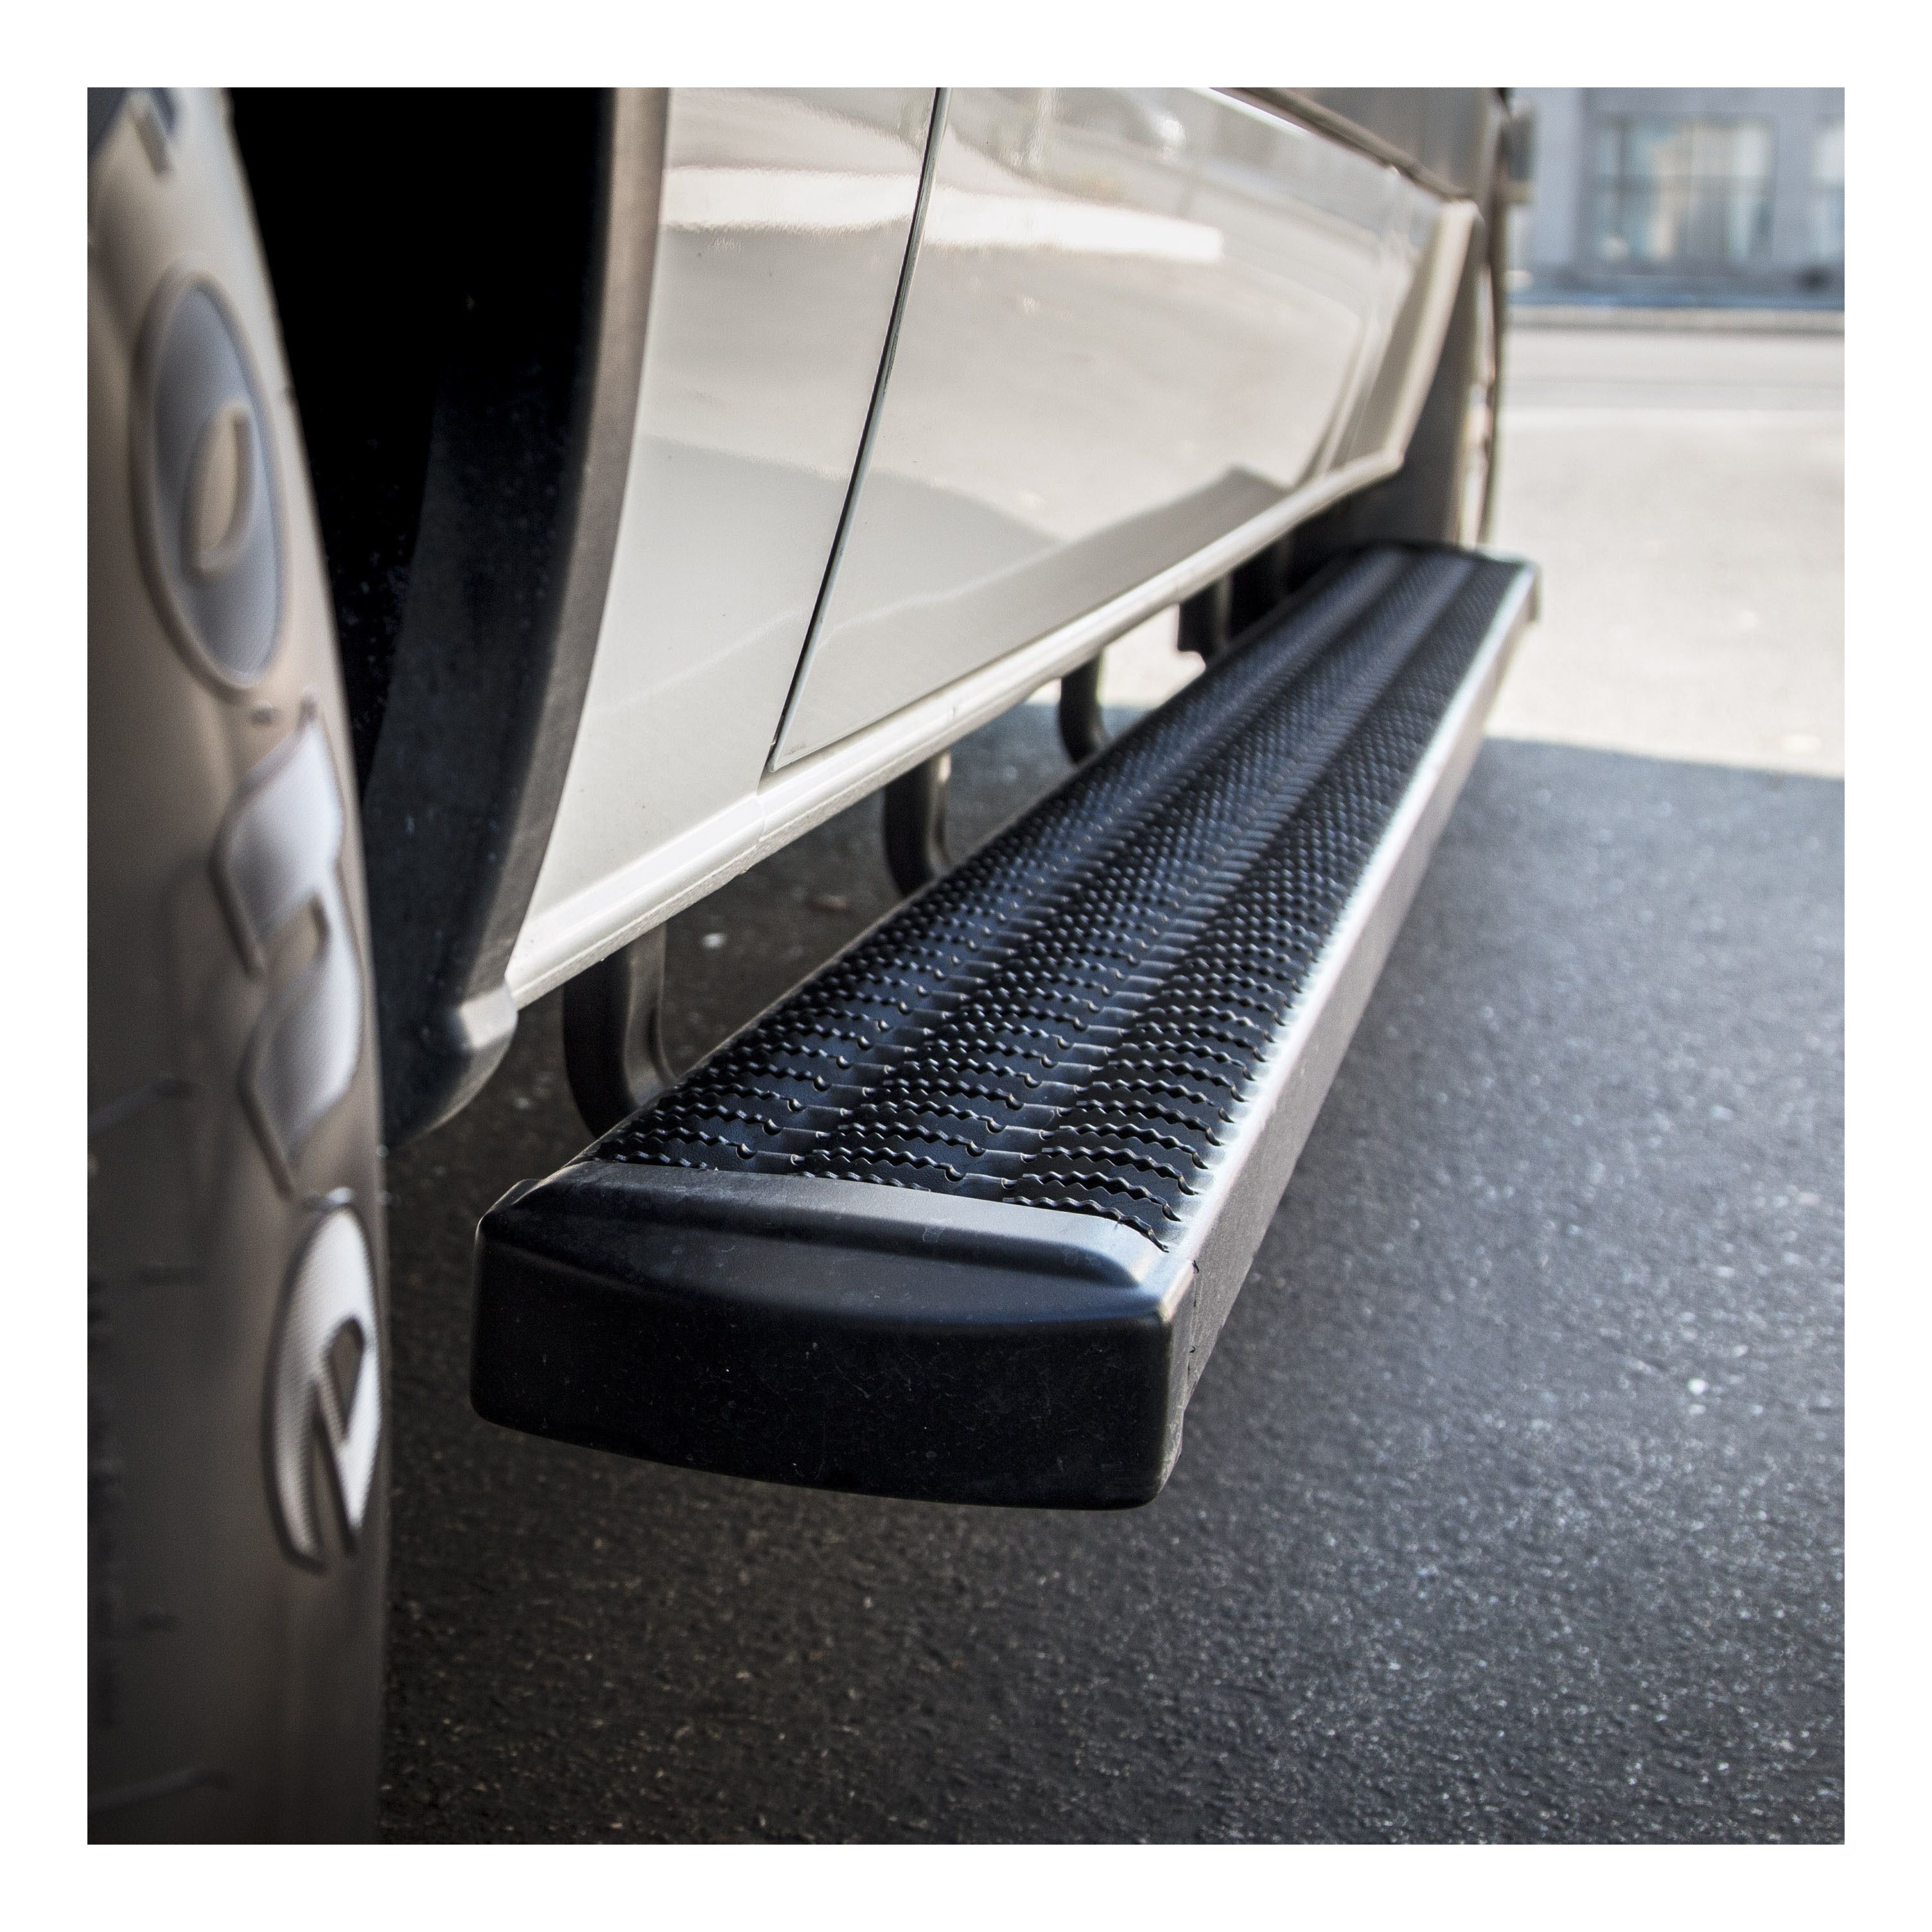 2014-2018 Chevrolet Silverado 1500 Double Cab Grip Step 7" Running Boards Black Textured Luverne Running Boards For A 2018 Chevy Silverado